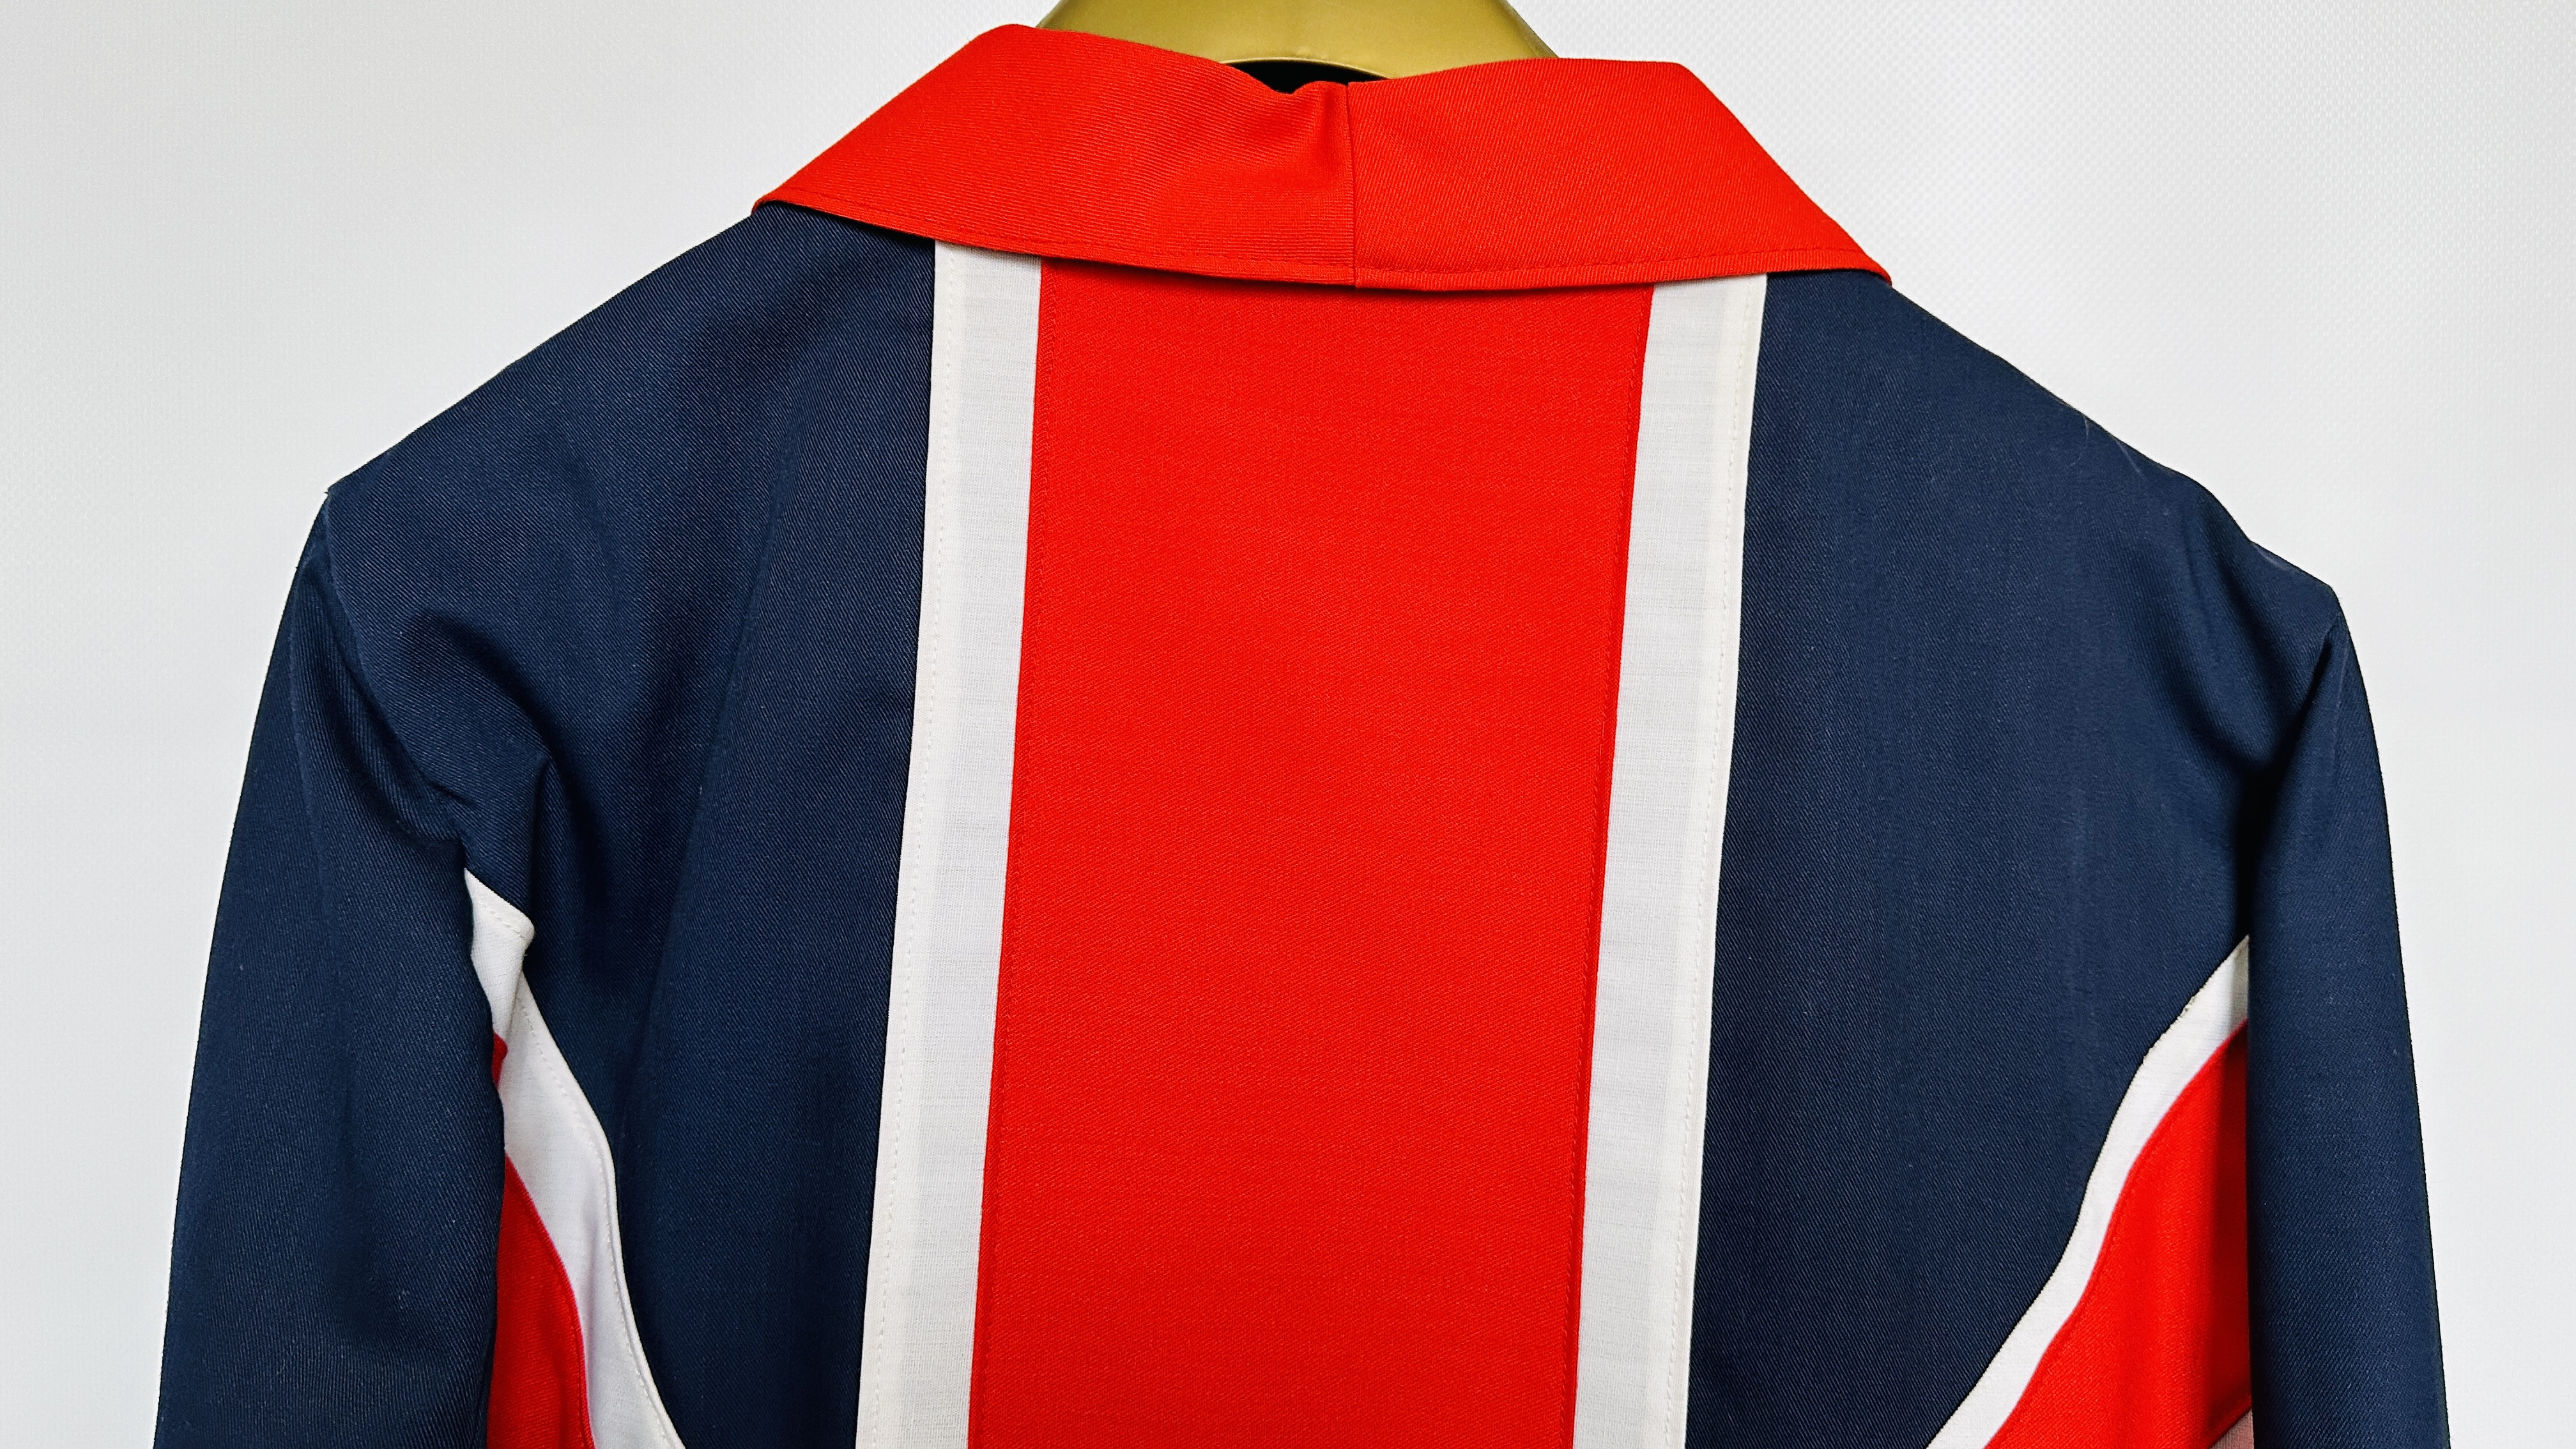 1960S UNION JACKET SUIT, RED TROUSERS - JACKET RED/WHITE/BLUE - A/F CONDITION, SOLD AS SEEN. - Image 8 of 12